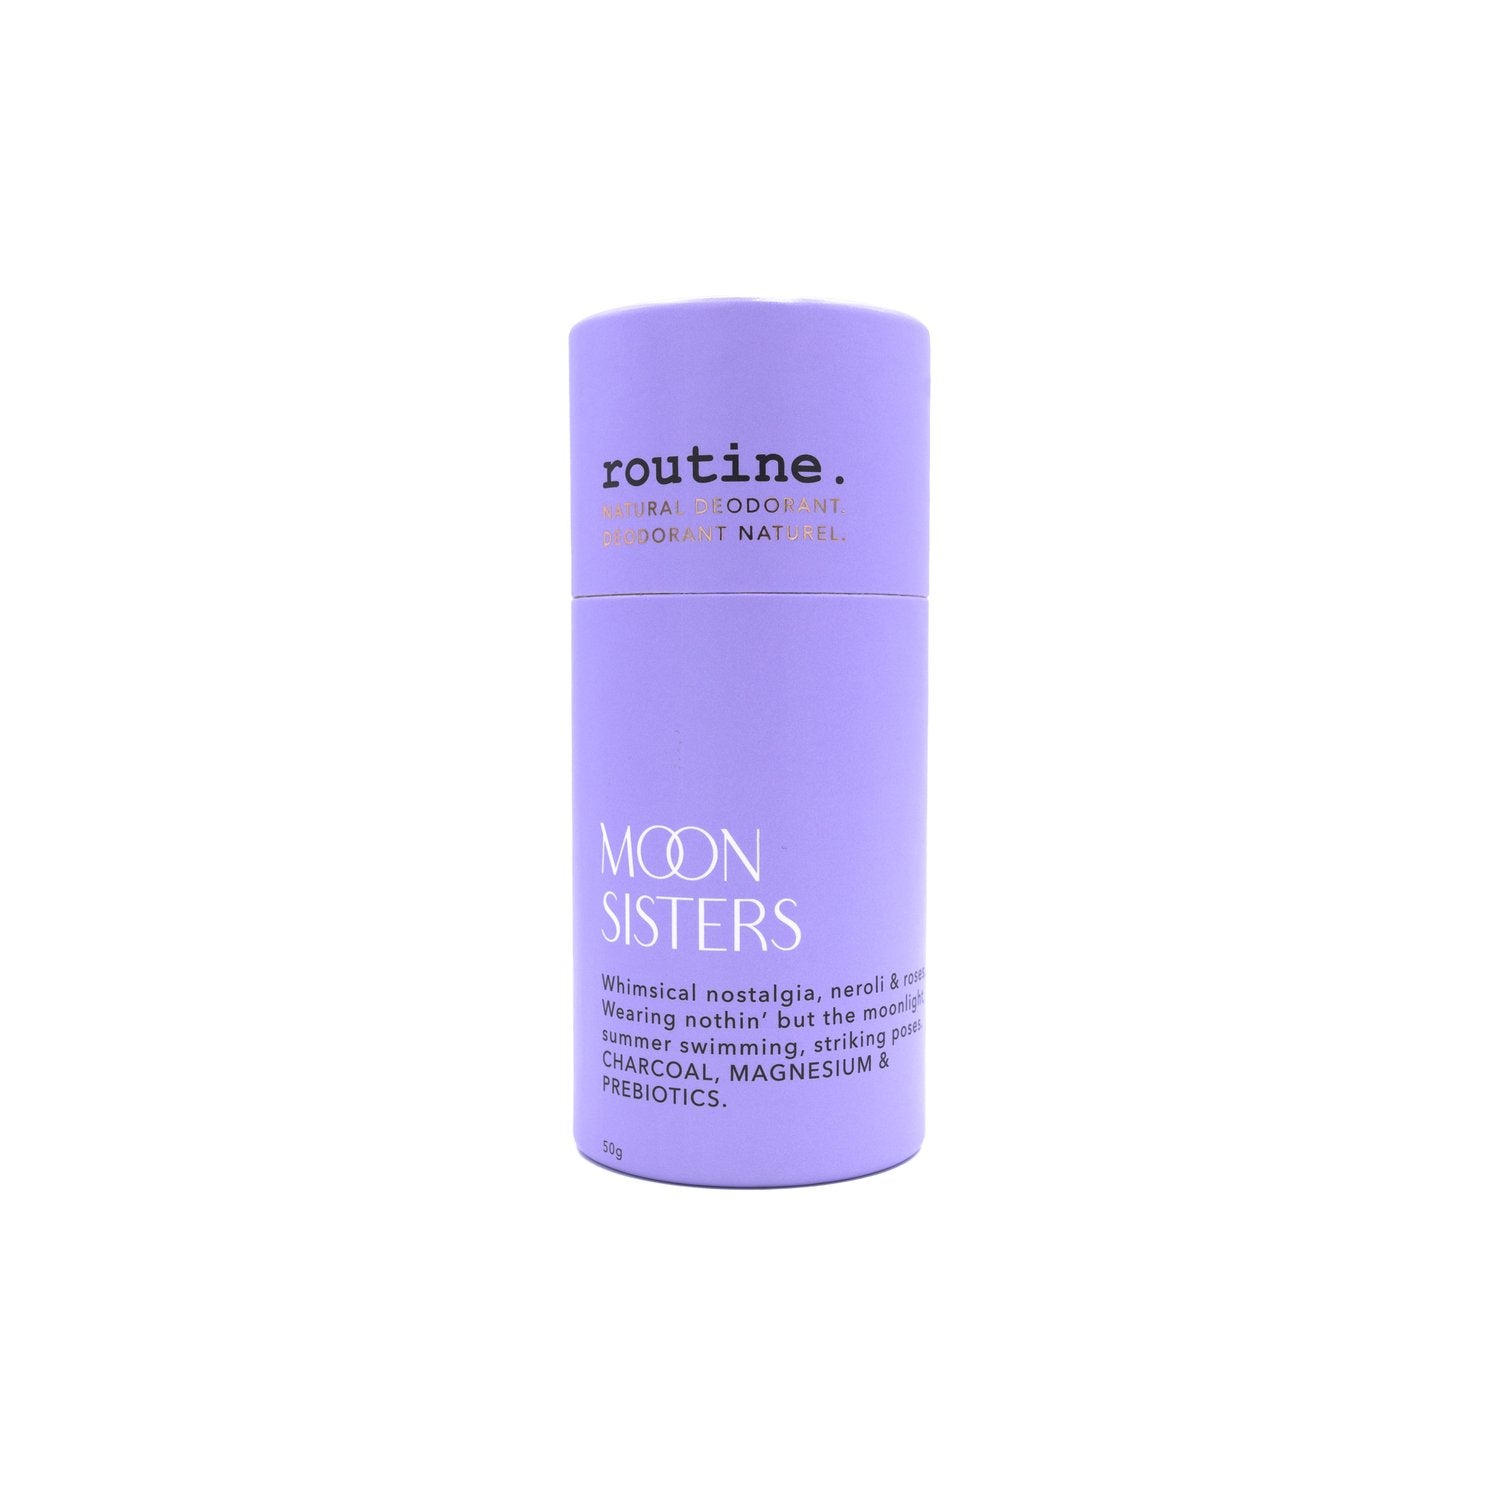 Routine Deodorant Stick - Moon Sisters (50g) - Lifestyle Markets